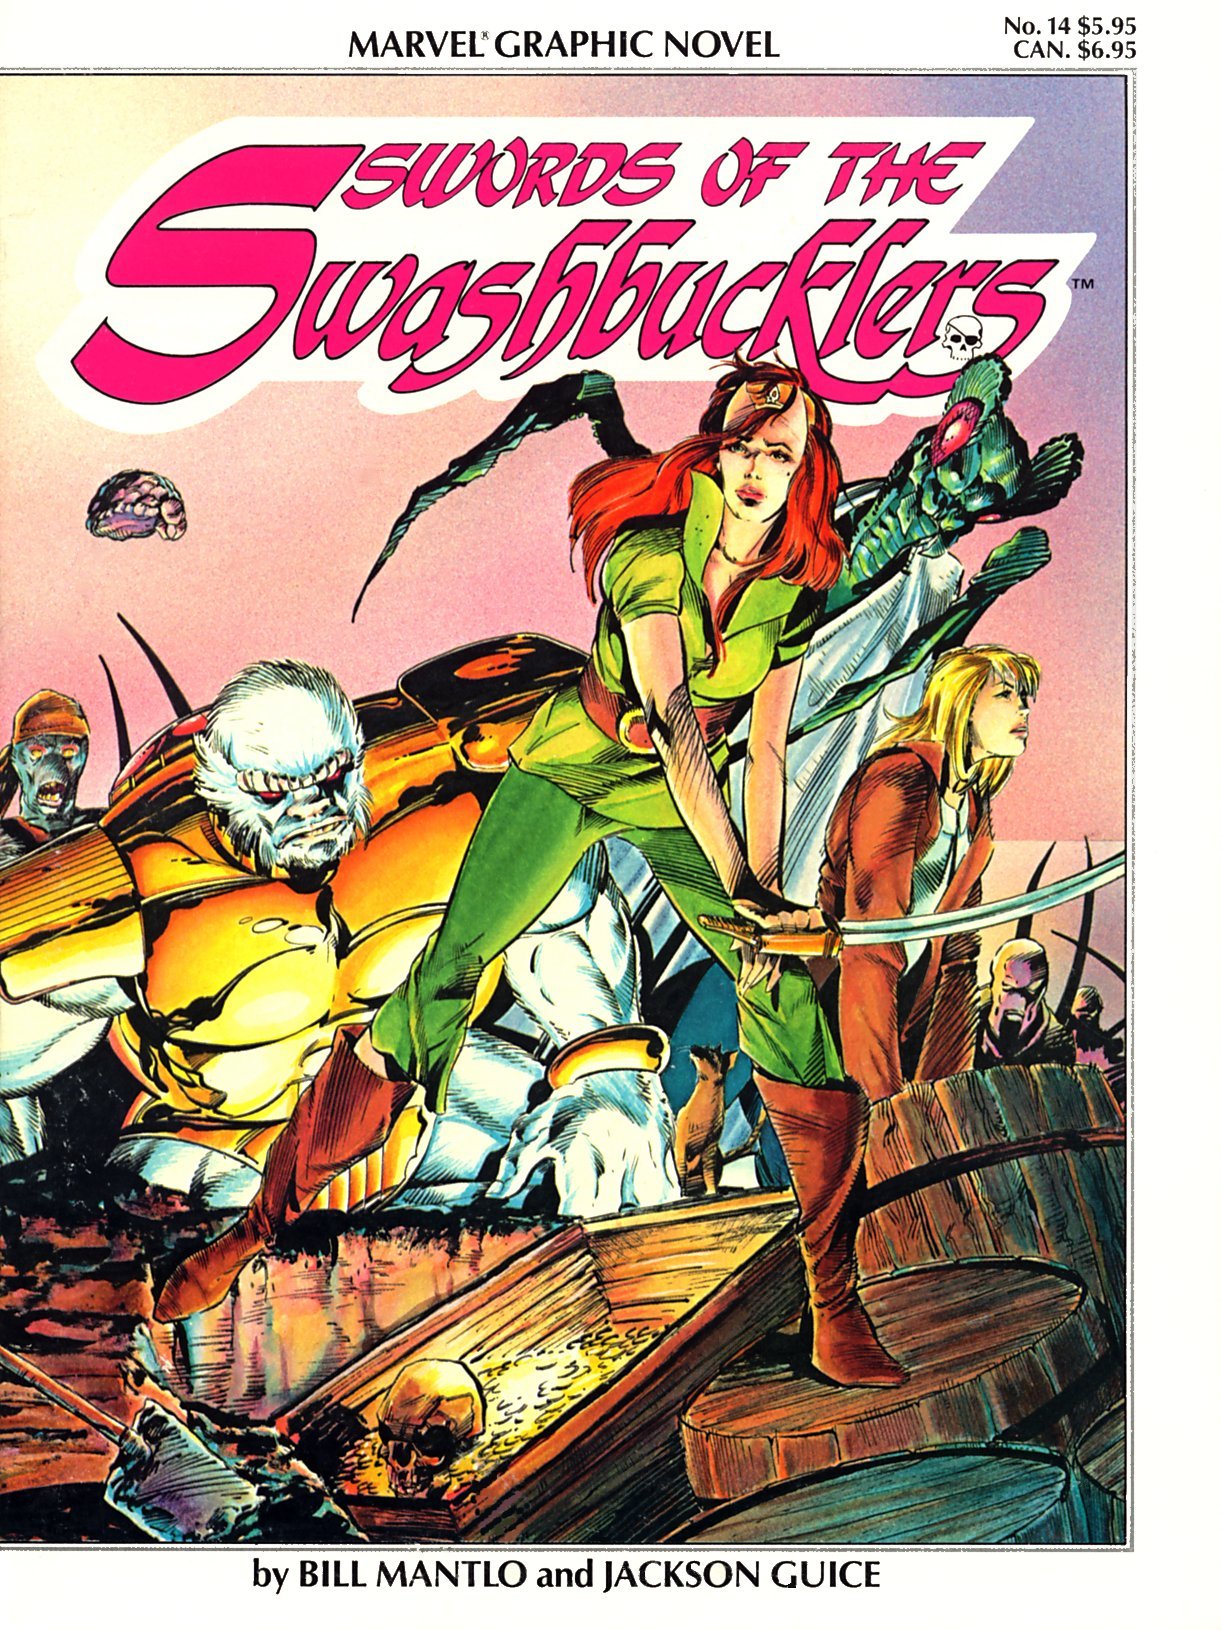 Read online Marvel Graphic Novel comic -  Issue #14 - Swords of the Swashbucklers - 1